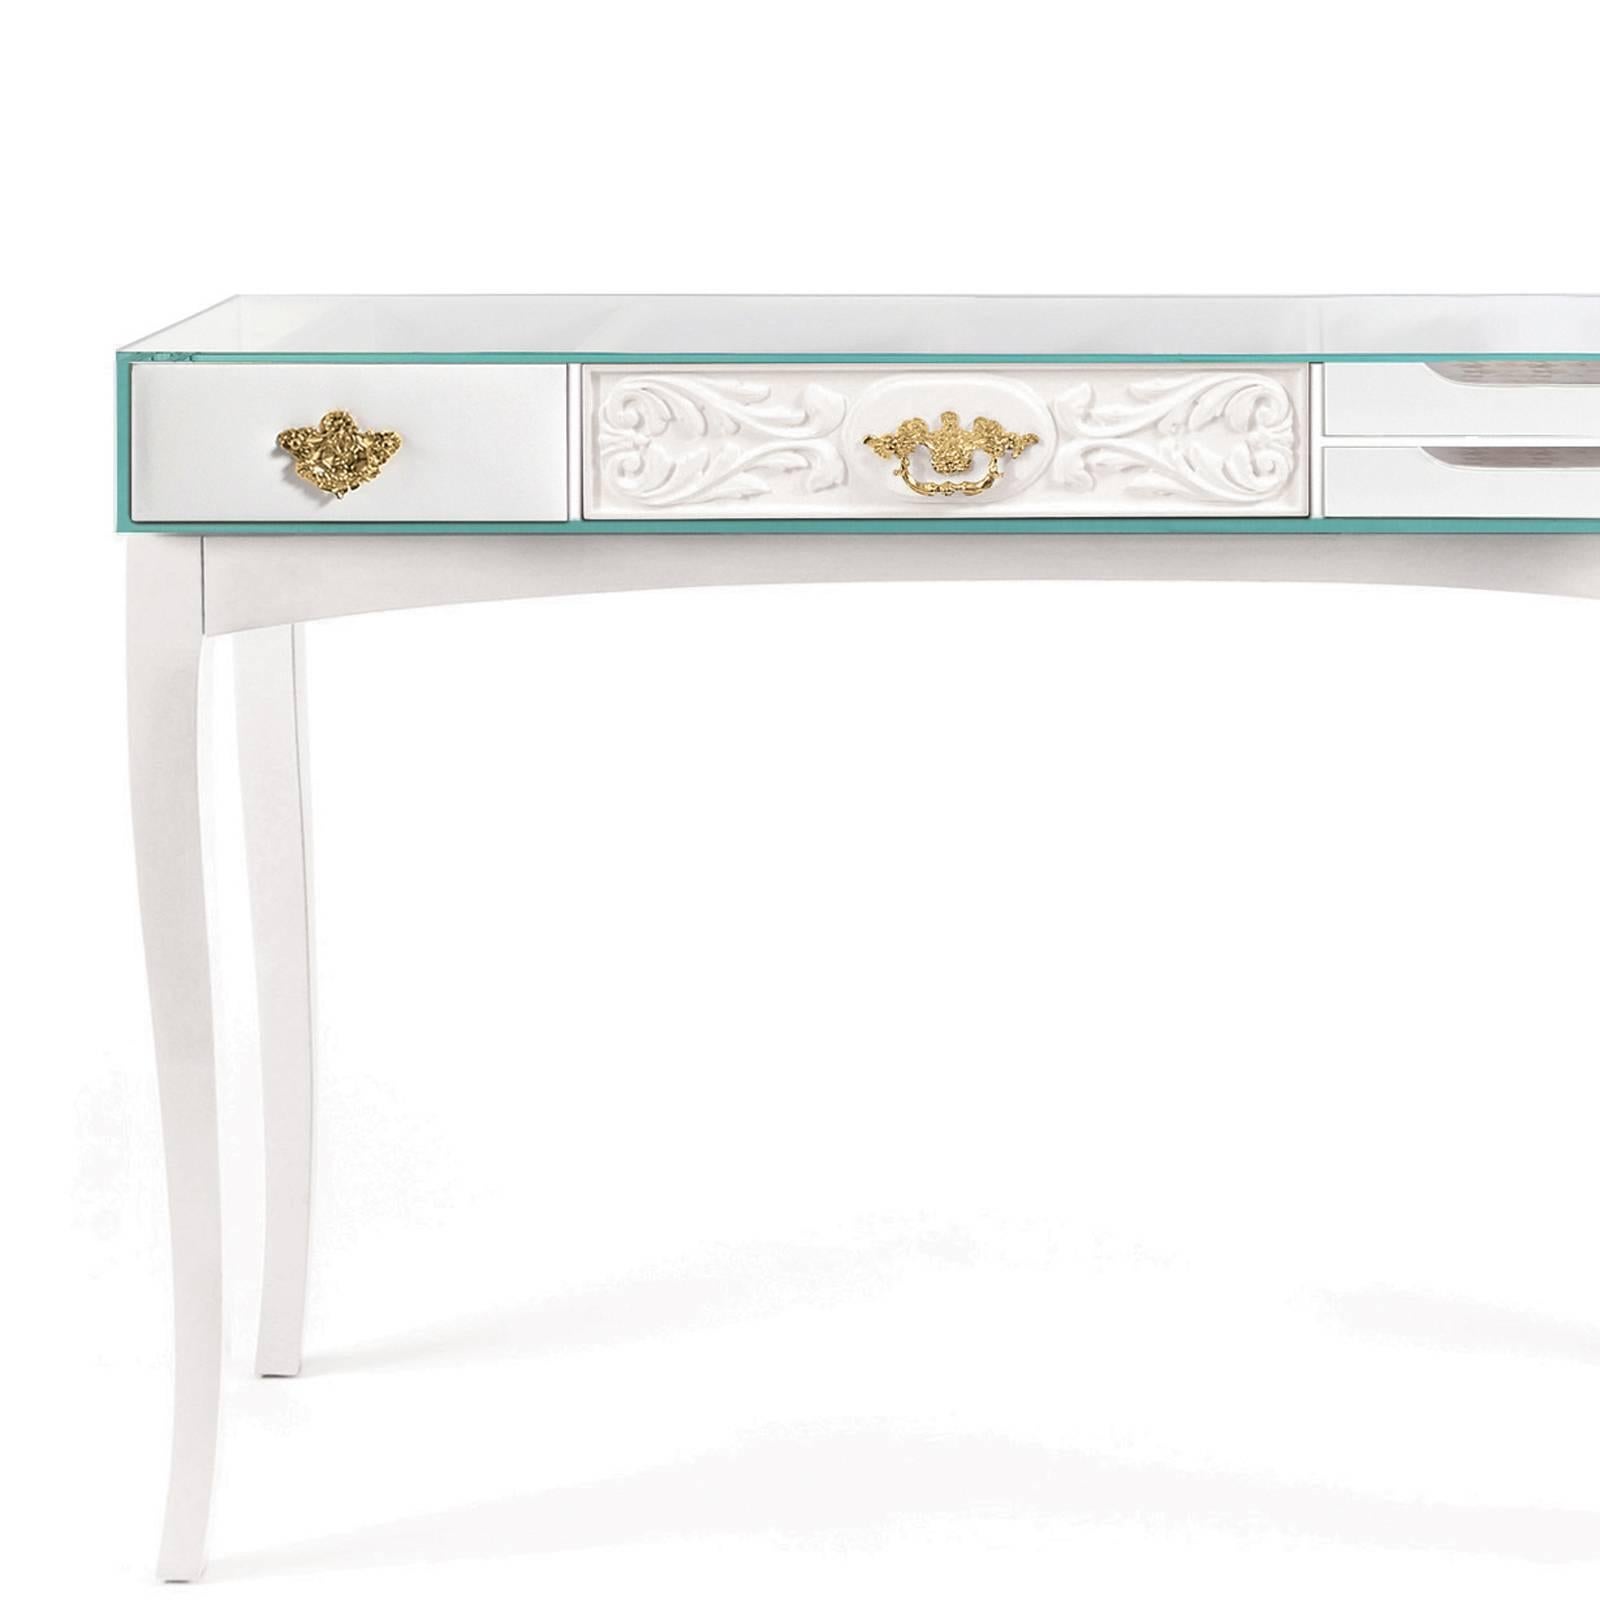 Console white finishes made with rosewood and
with lacquered glass top. With 5 drawers. With brass handles.
Available in:
L 118 x D 43 x H 87cm, price: 9900,00€.
L 105 x D 43 x H 87cm, price: 9500,00€.
L 90 x D 43 x H 87cm, price: 7900,00€.
L 85 x D